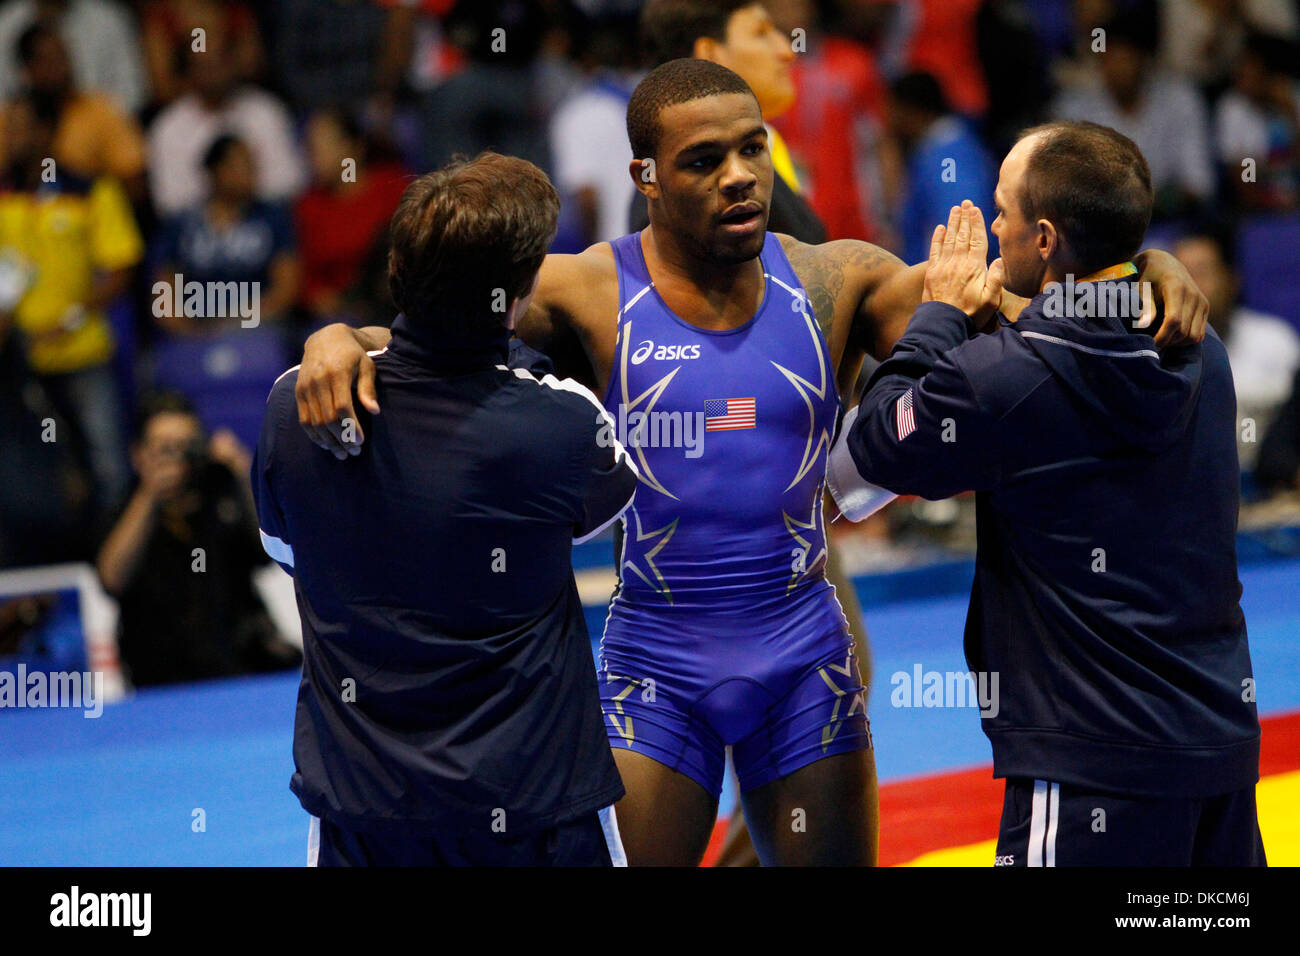 Oct. 24, 2011 - Guadalajara, Mexico - JORDAN BURROUGHS of the United States is loosened up by coaches during a break in his match against J. Mercado of Ecuador in the men's 74 kilogram  freestyle wrestling quarterfinals at the 2011 Pan American Games. Burroughts, a two-time NCAA title winner for the University of Nebraska, went on to win the gold medal against Yunierki Blanco of Cu Stock Photo